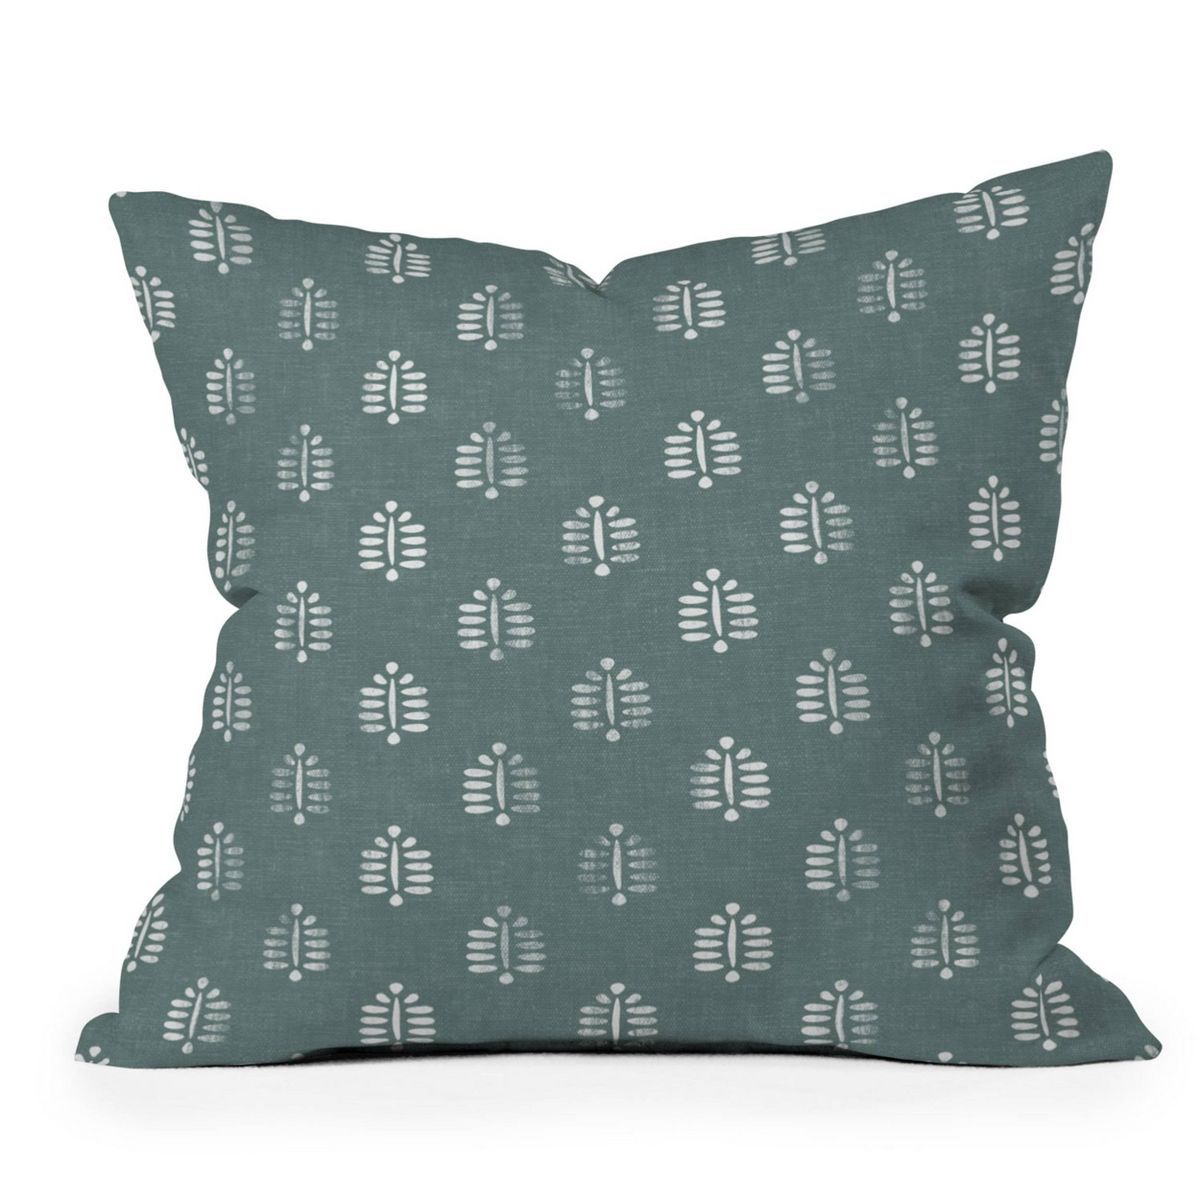 16"x16" Jessica Prout Block Print Ferns Square Throw Pillow Green - Deny Designs | Target